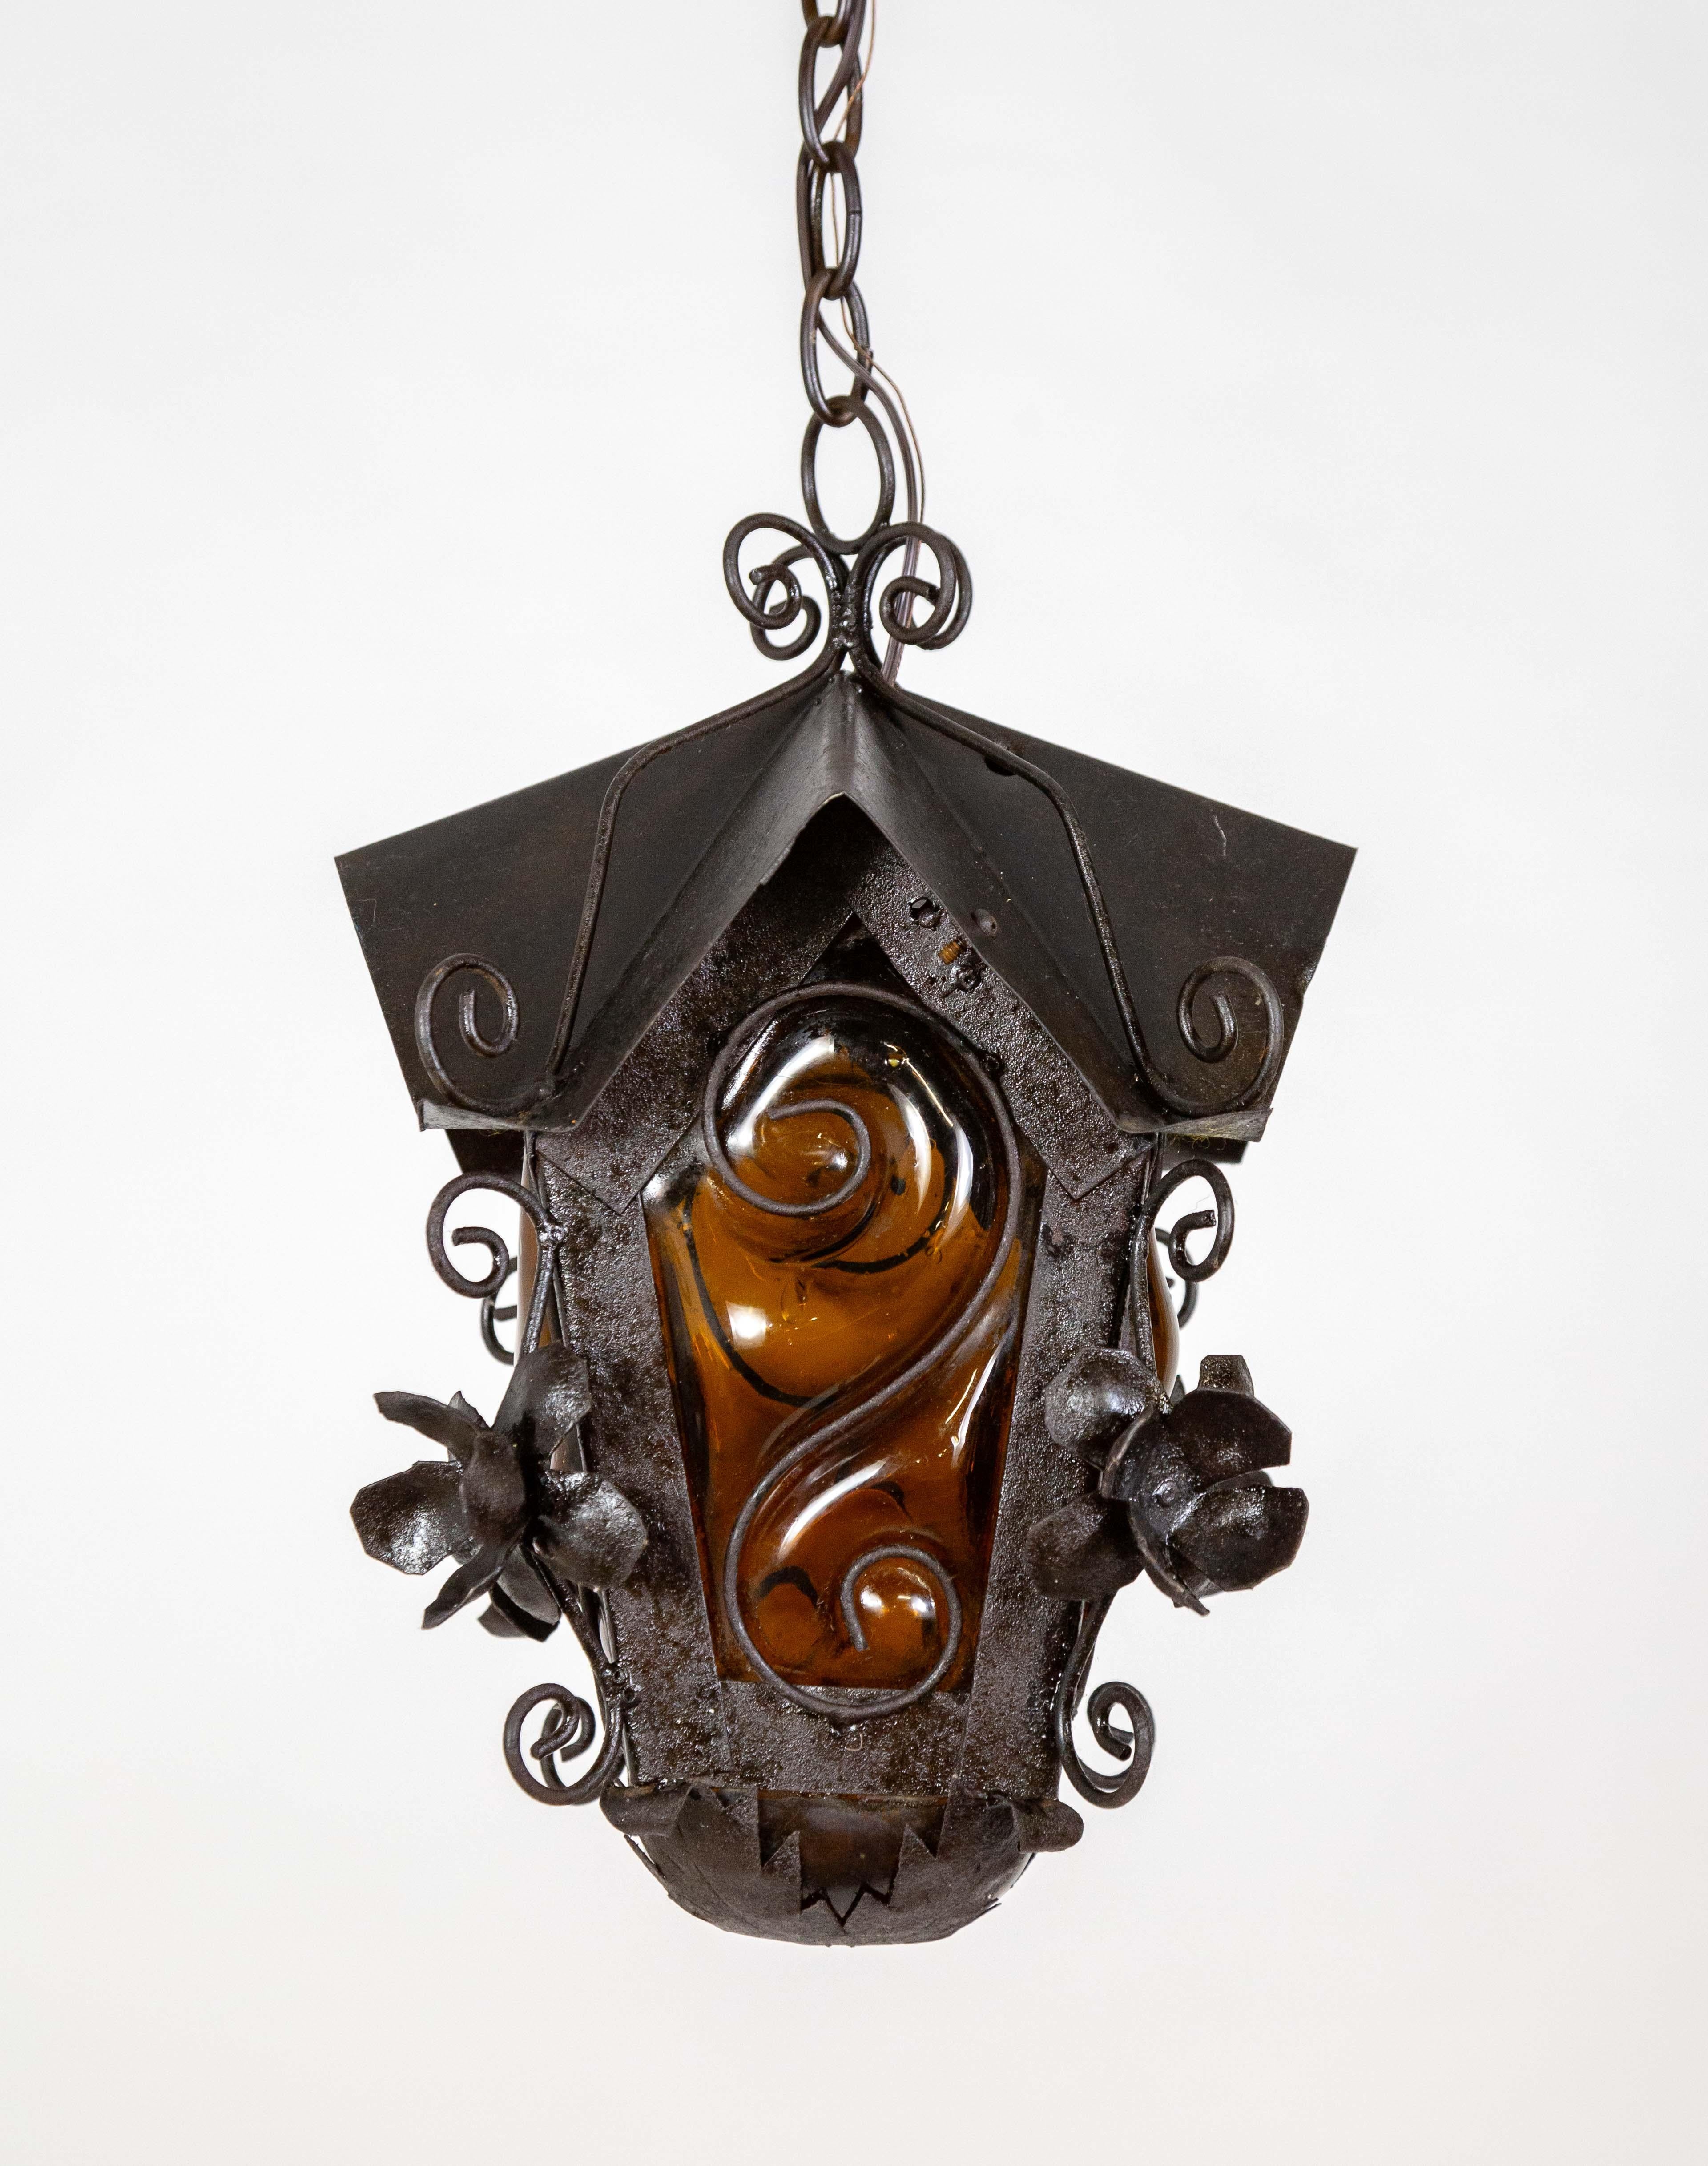 A mid-20th century black metal birdhouse-shaped hanging lantern with a gothic feel.  It is detailed with dimensional flowers and curls between the windows. The four windows are amber blown glass caged in an S-curve. Light also emits from the bottom